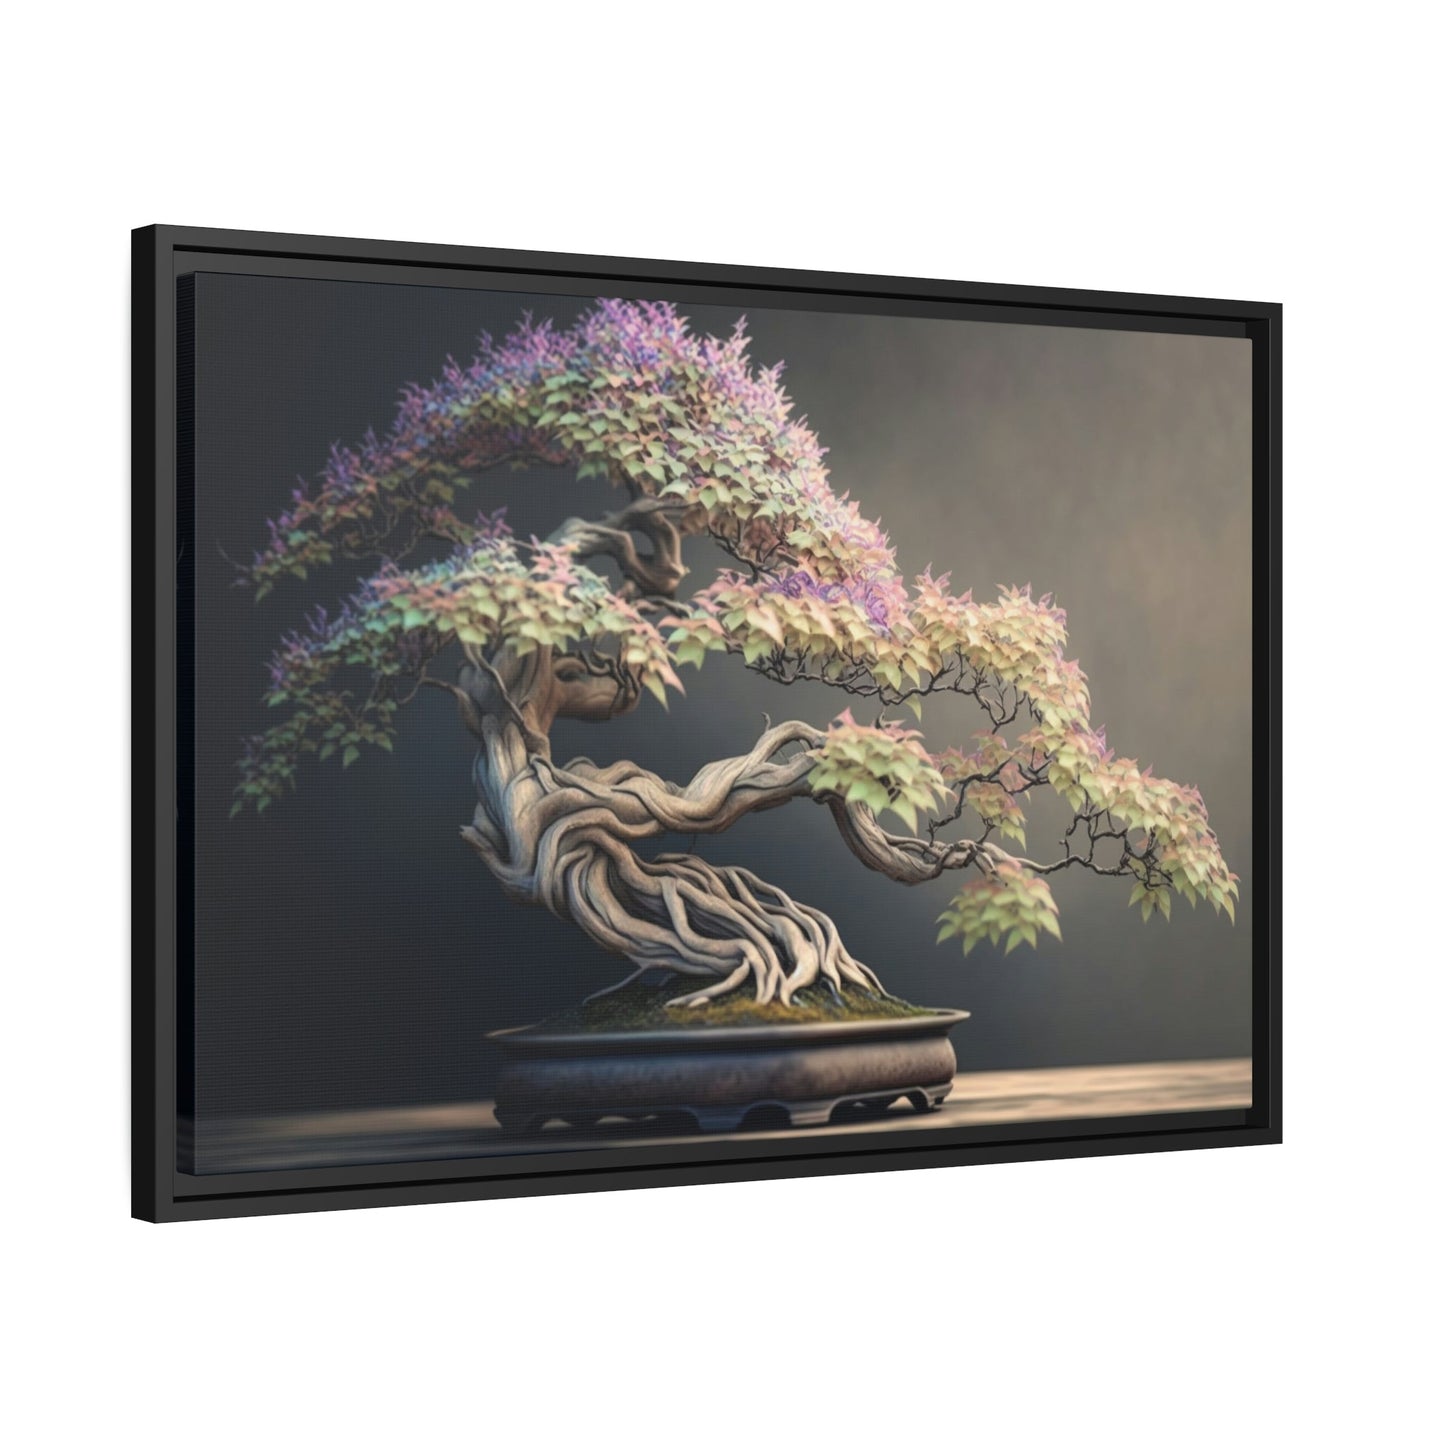 Bonsai Elegance: Wall Art and Print on Canvas with Sophisticated Bonsai Tree Art